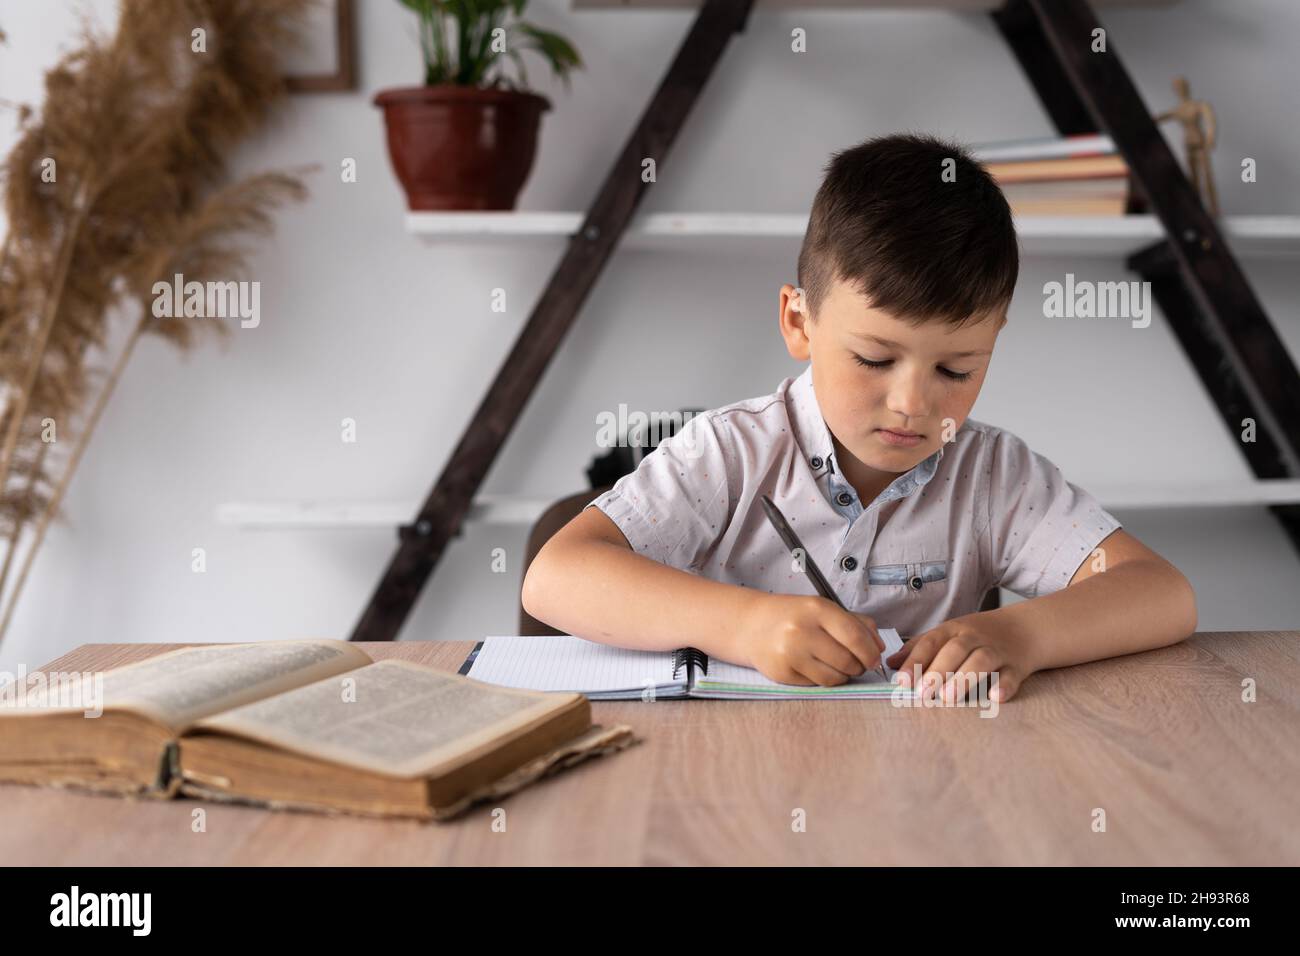 Workplace and homework of a schoolboy boy sitting at a lesson at a desk. Home school. Pupil or student preparing for tests or task. Handwritten text Stock Photo